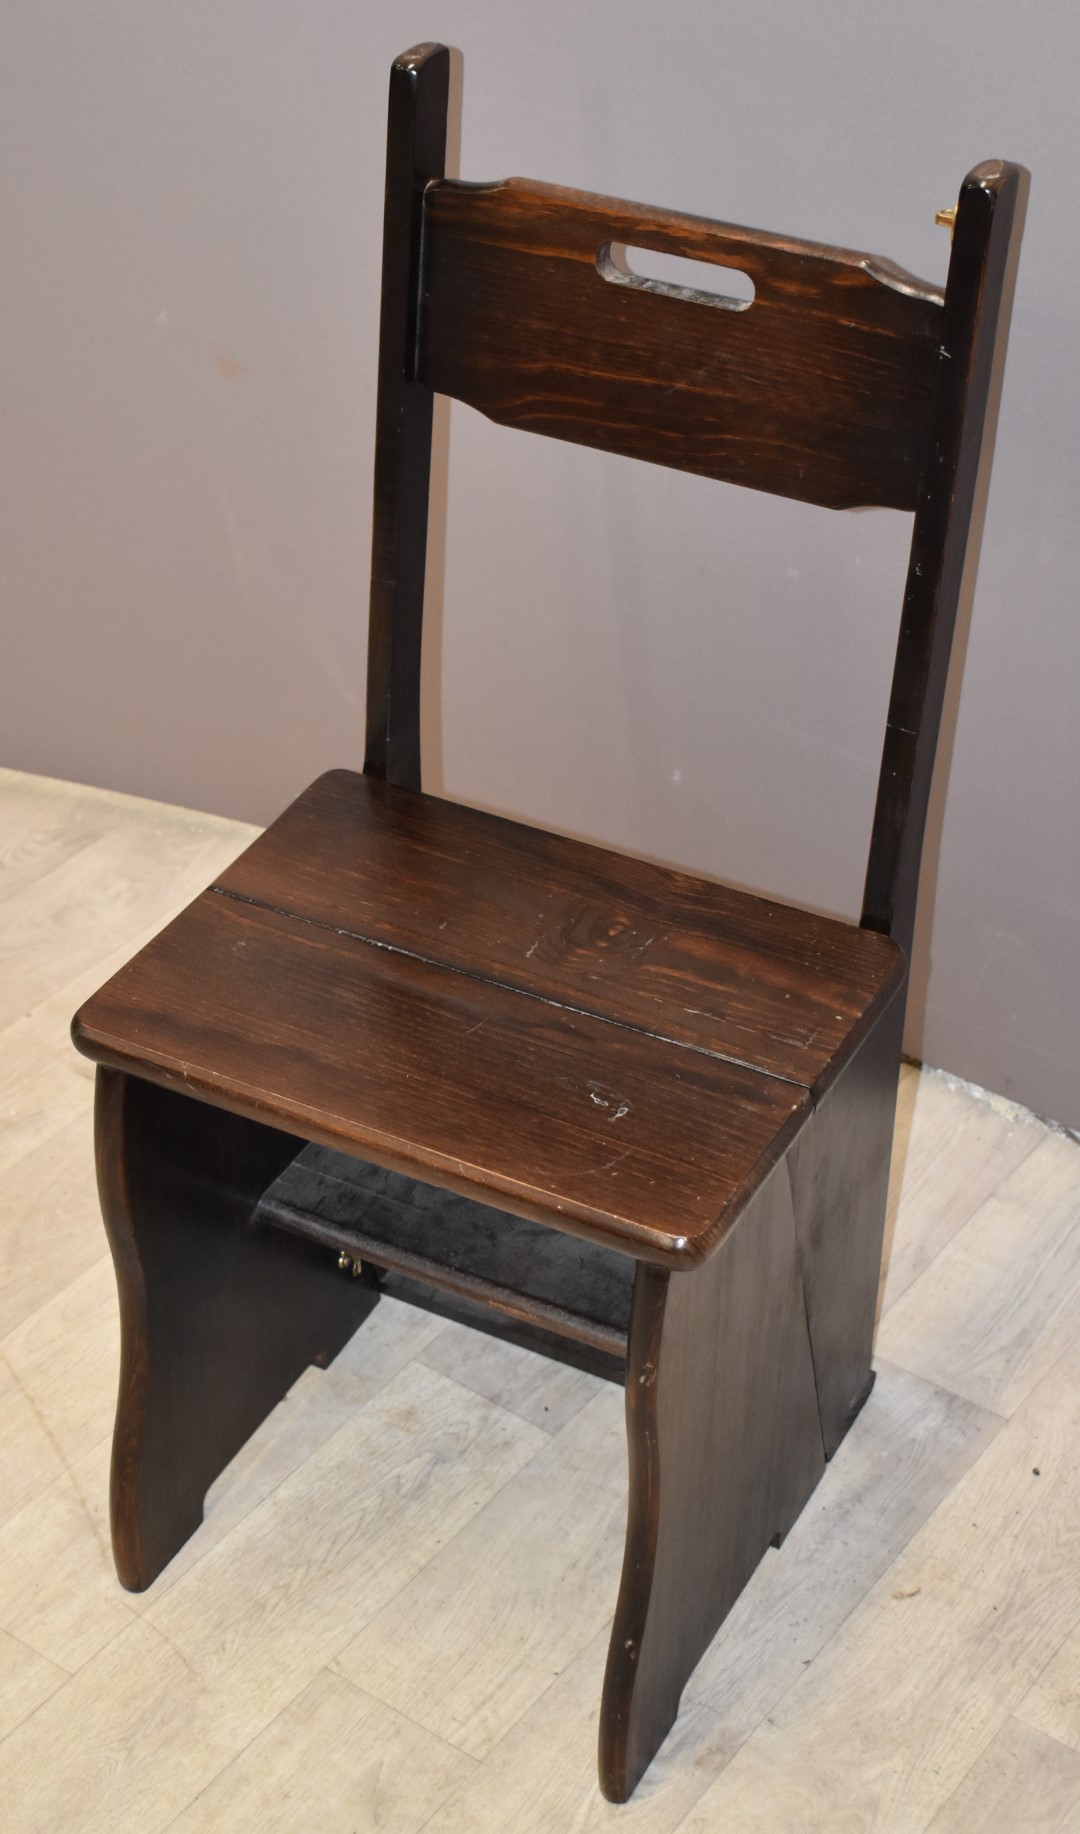 Stained wood metamorphic library steps or chair, height of top step 92cm - Image 2 of 3